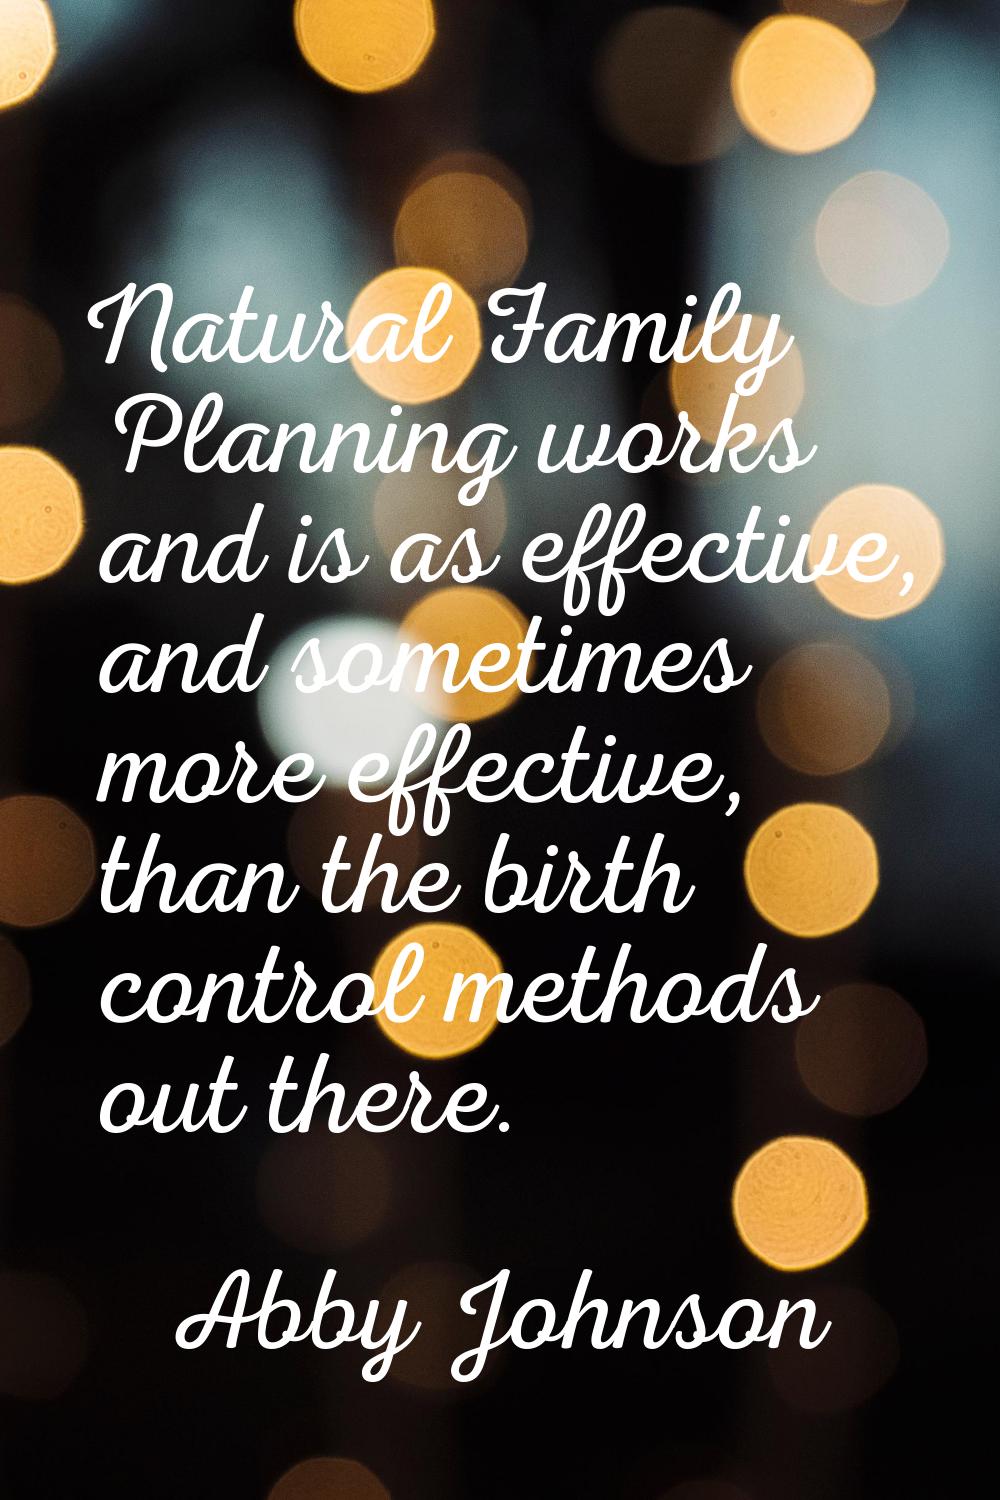 Natural Family Planning works and is as effective, and sometimes more effective, than the birth con